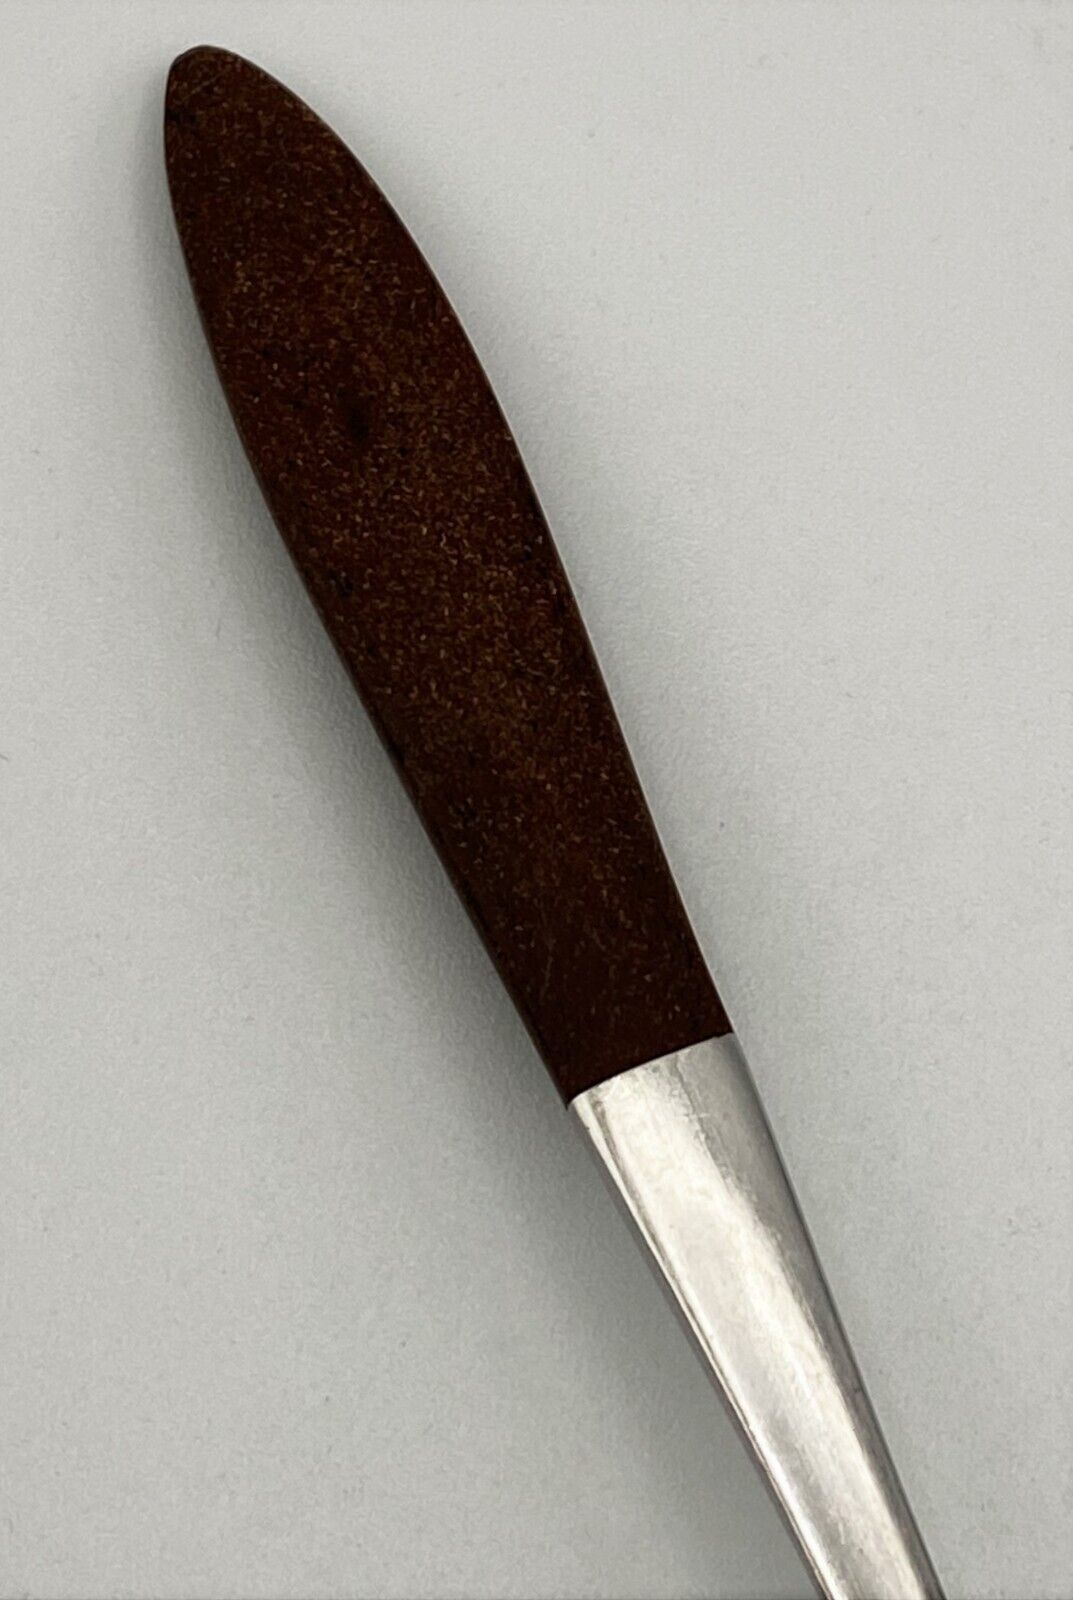 Epic EPS15 Stainless-Your Choice of Pieces- Mid Century Danish Style Wood Handle - $10.54 - $22.40